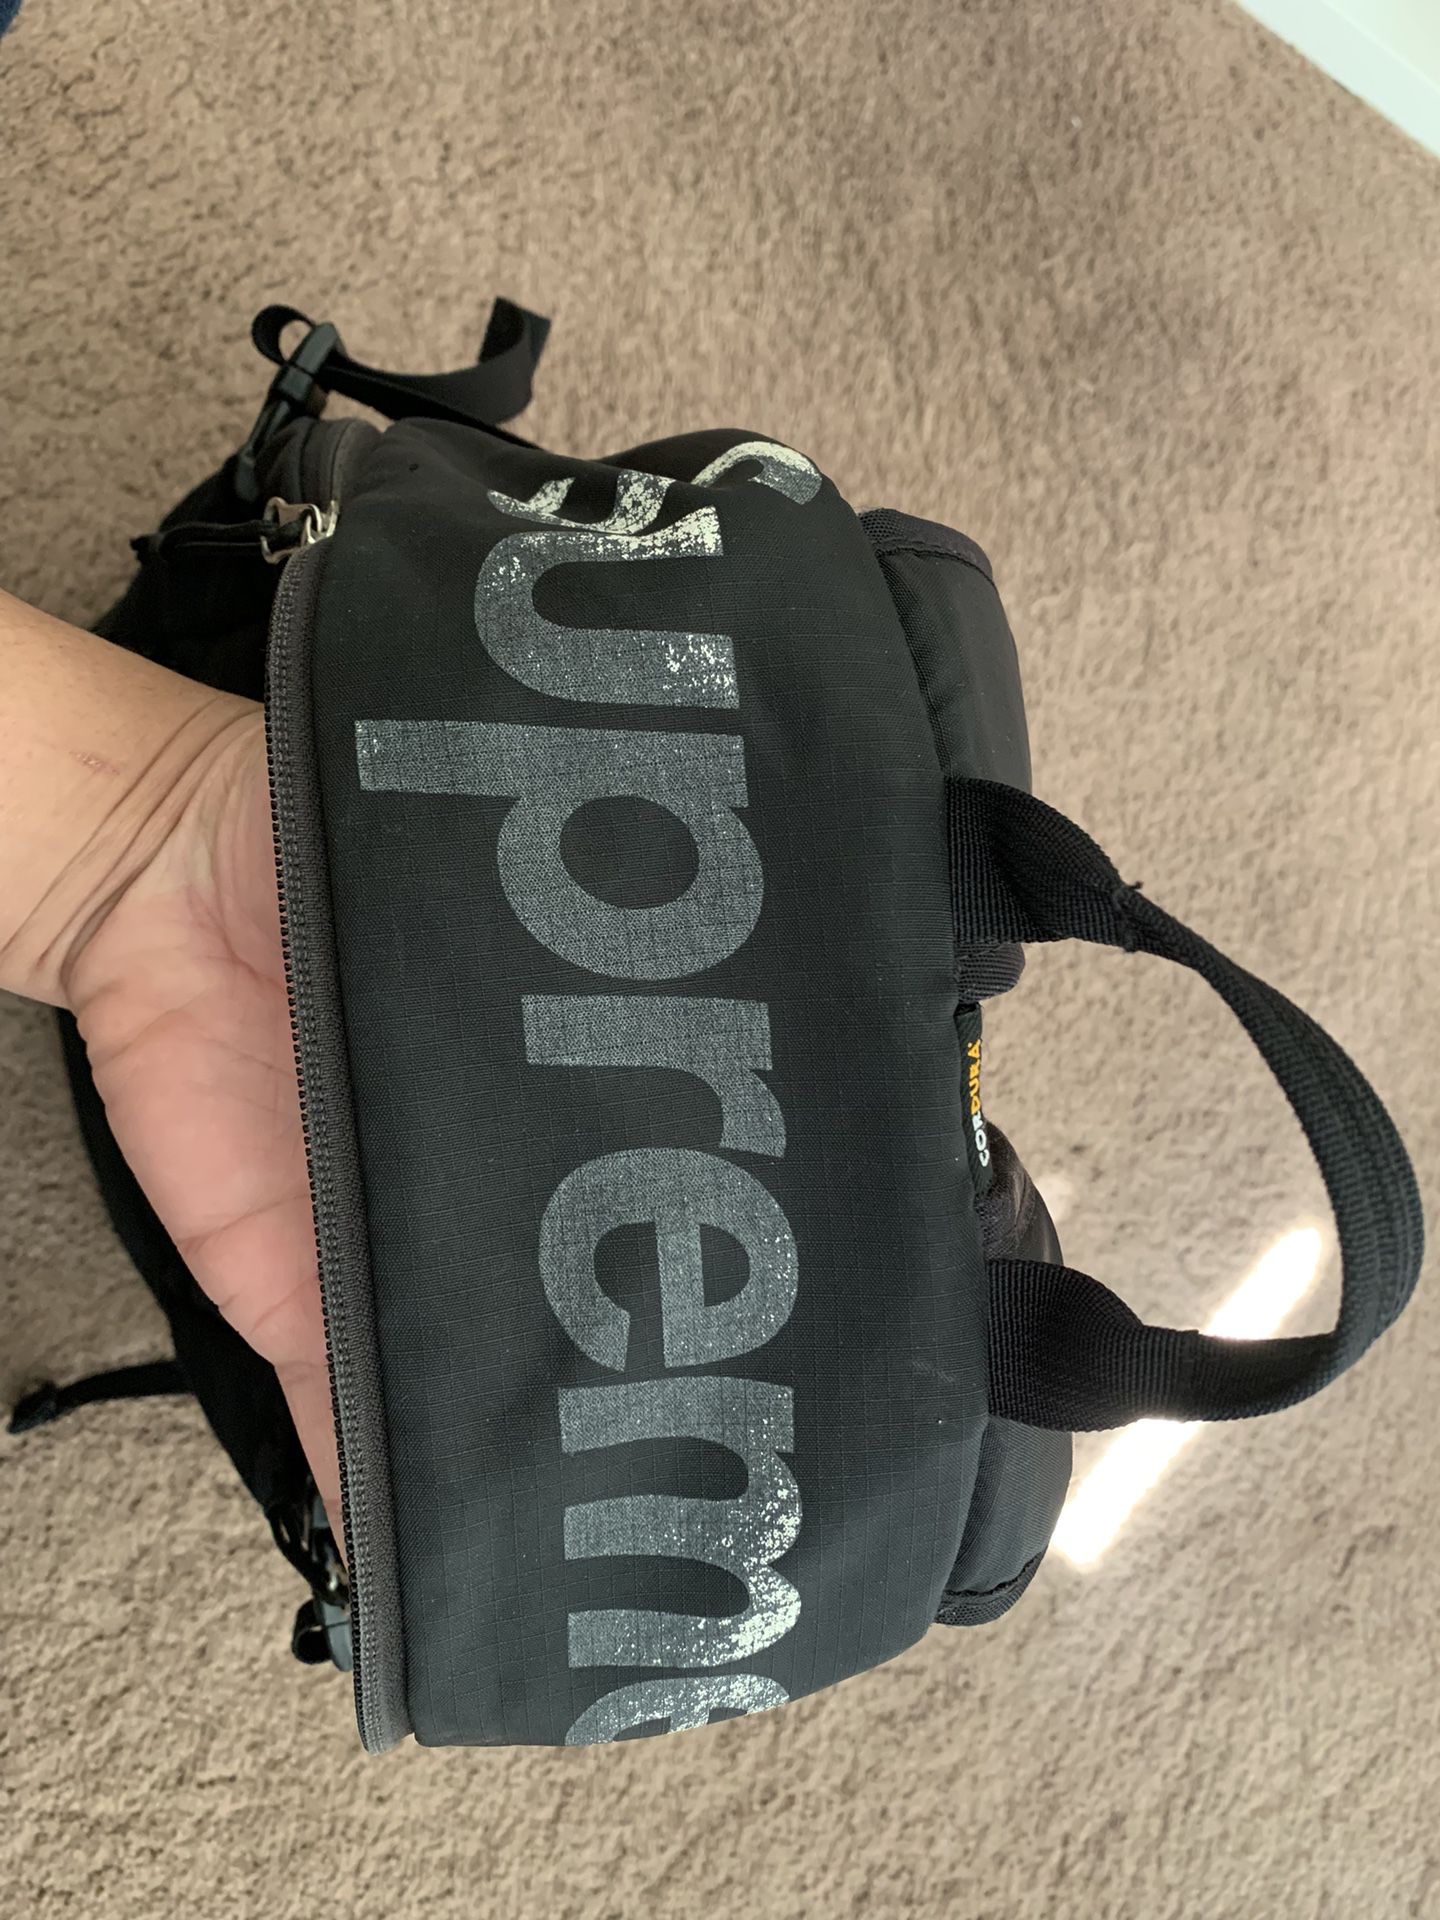 Supreme Backpack Ss20 for Sale in Fontana, CA - OfferUp